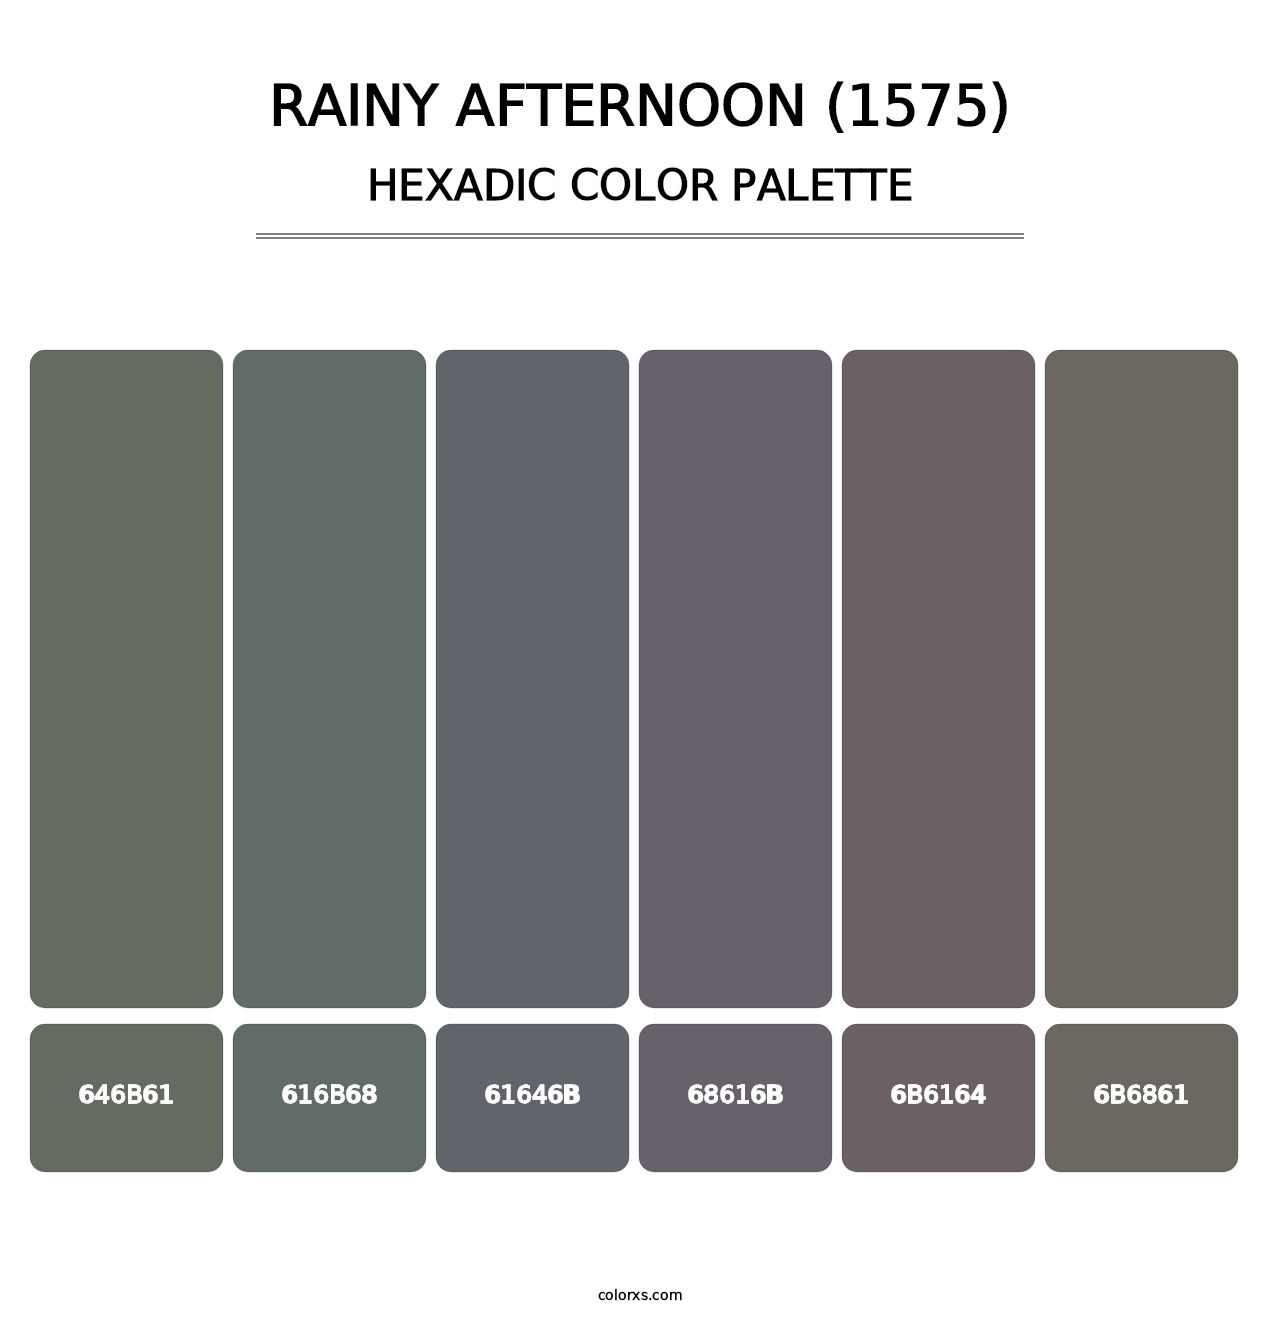 Rainy Afternoon (1575) - Hexadic Color Palette